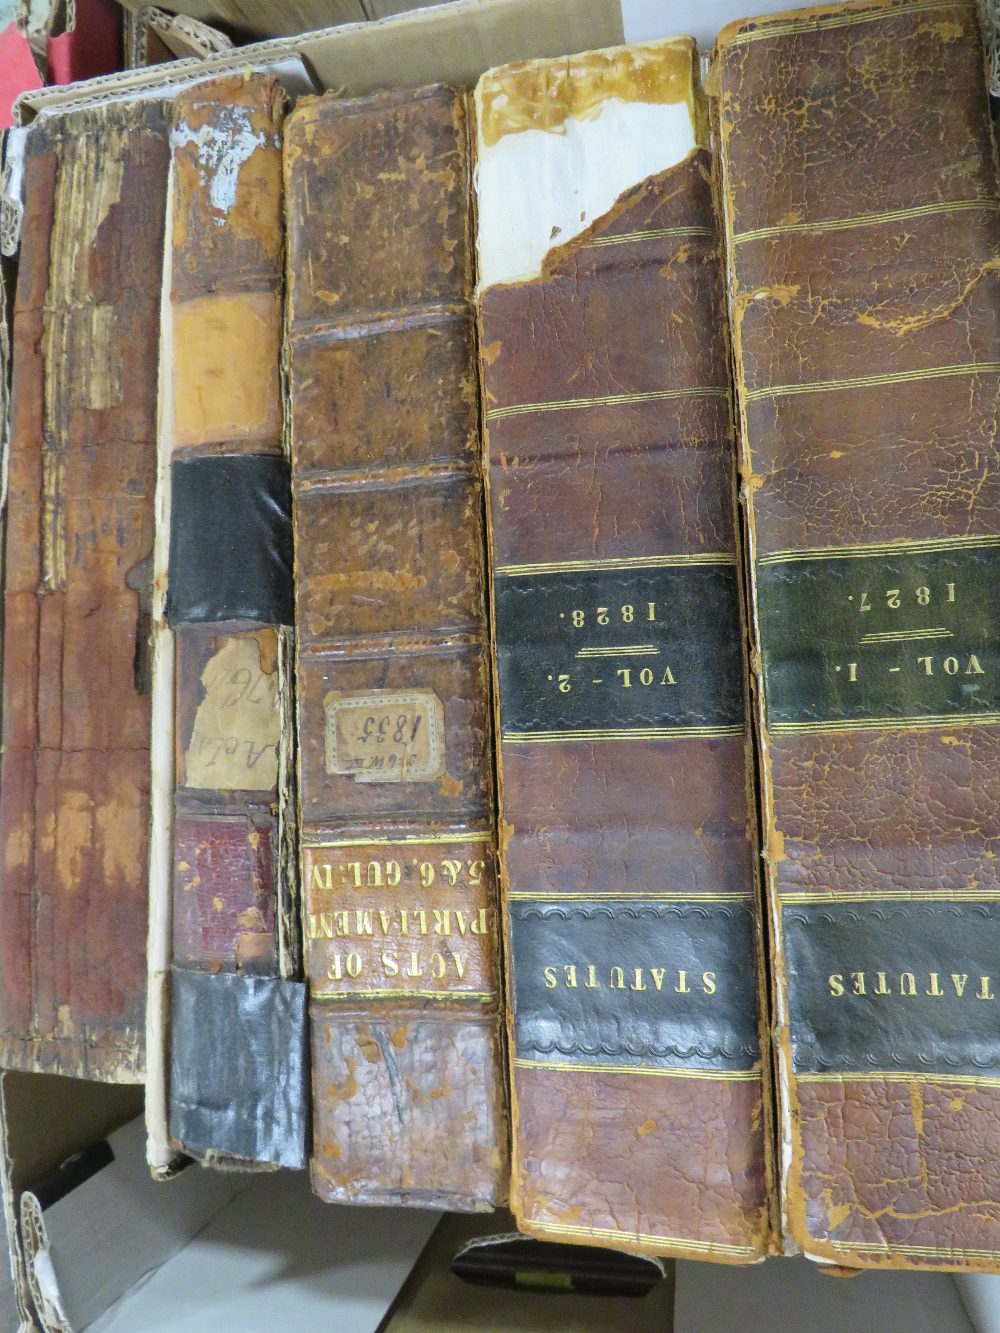 TWO TRAYS OF ACTS OF PARLIAMENT STATUTES, 11 VOLUMES 18TH & EARLY 19TH CENTURY - Image 3 of 5